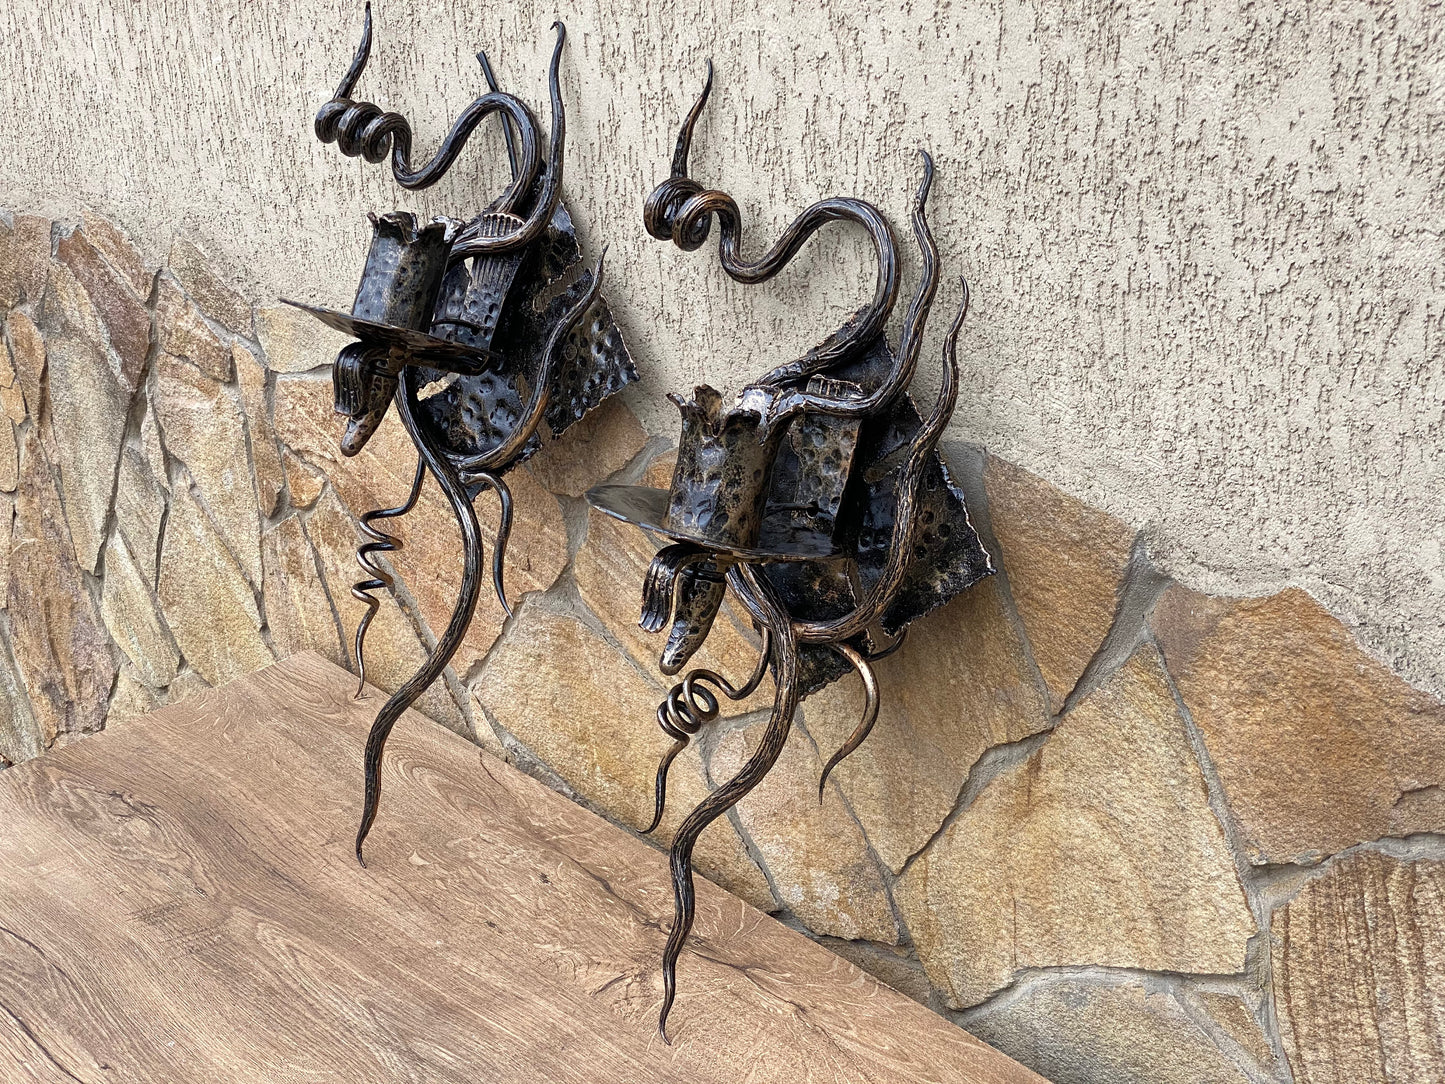 Wall sconce, iron gift, candle holder, Christmas, anniversary, birthday, sconce, medieval, viking, wedding gift, newlyweds gift, dads gift